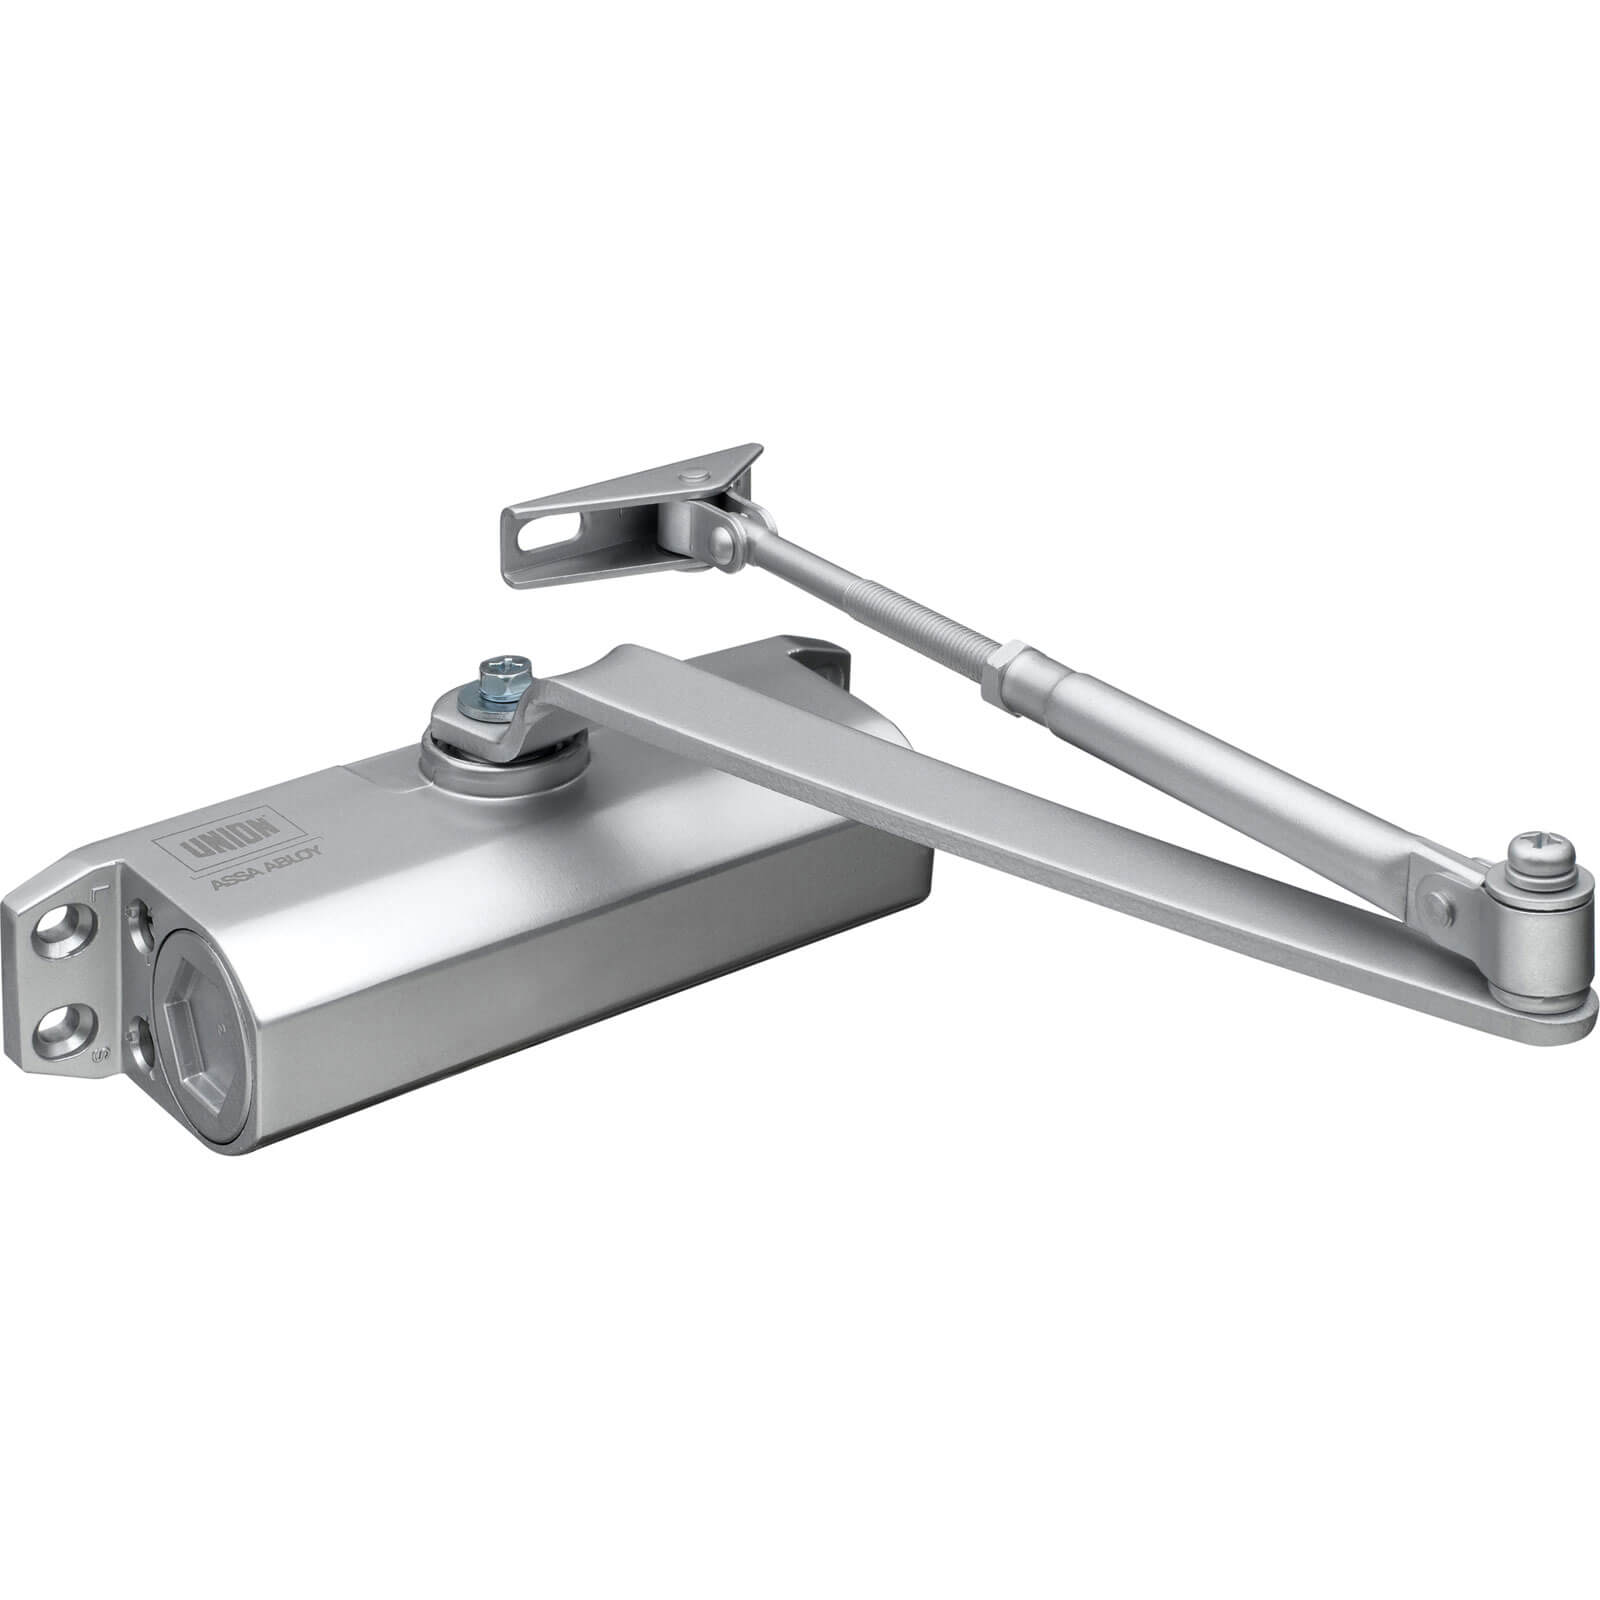 Union Ce3f Size 3 Rack And Pinion Door Closer 60kg